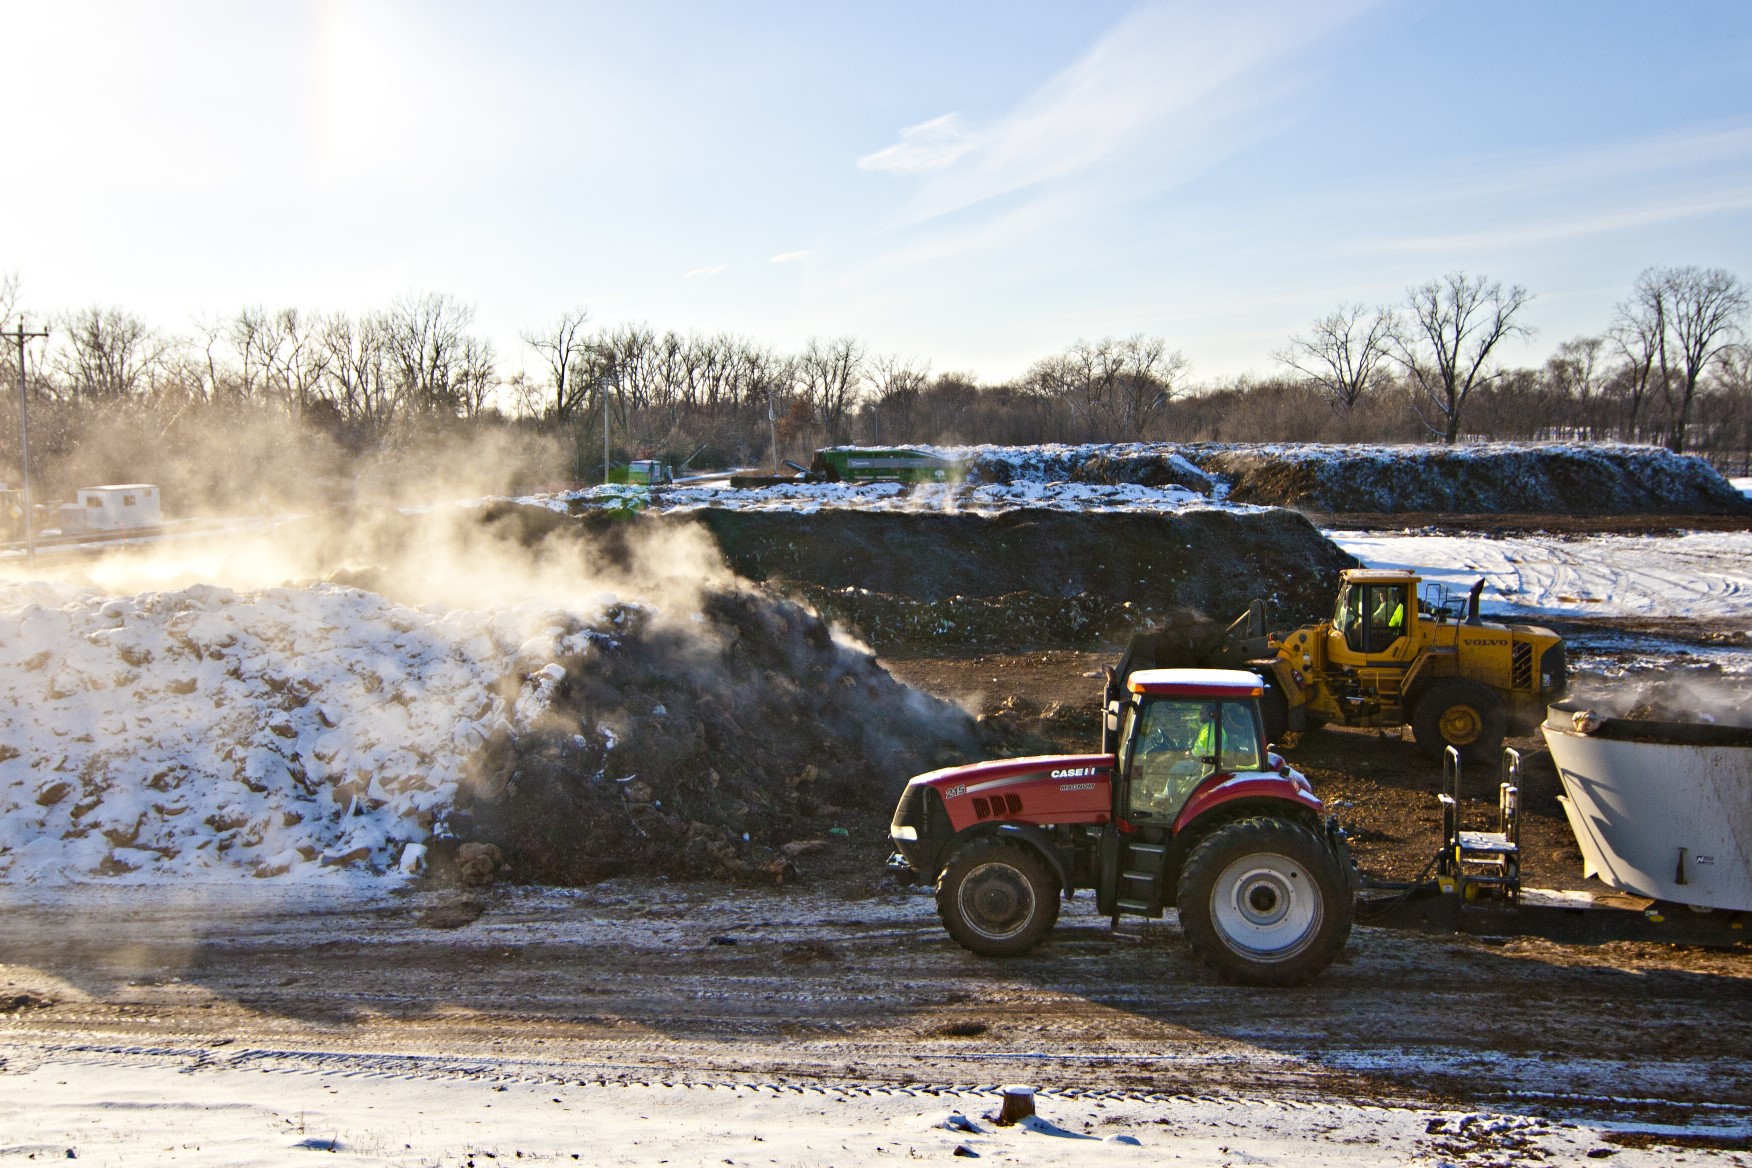 Tractor in a commercial/industrial operation of composting next to a giant pile of steaming compost product